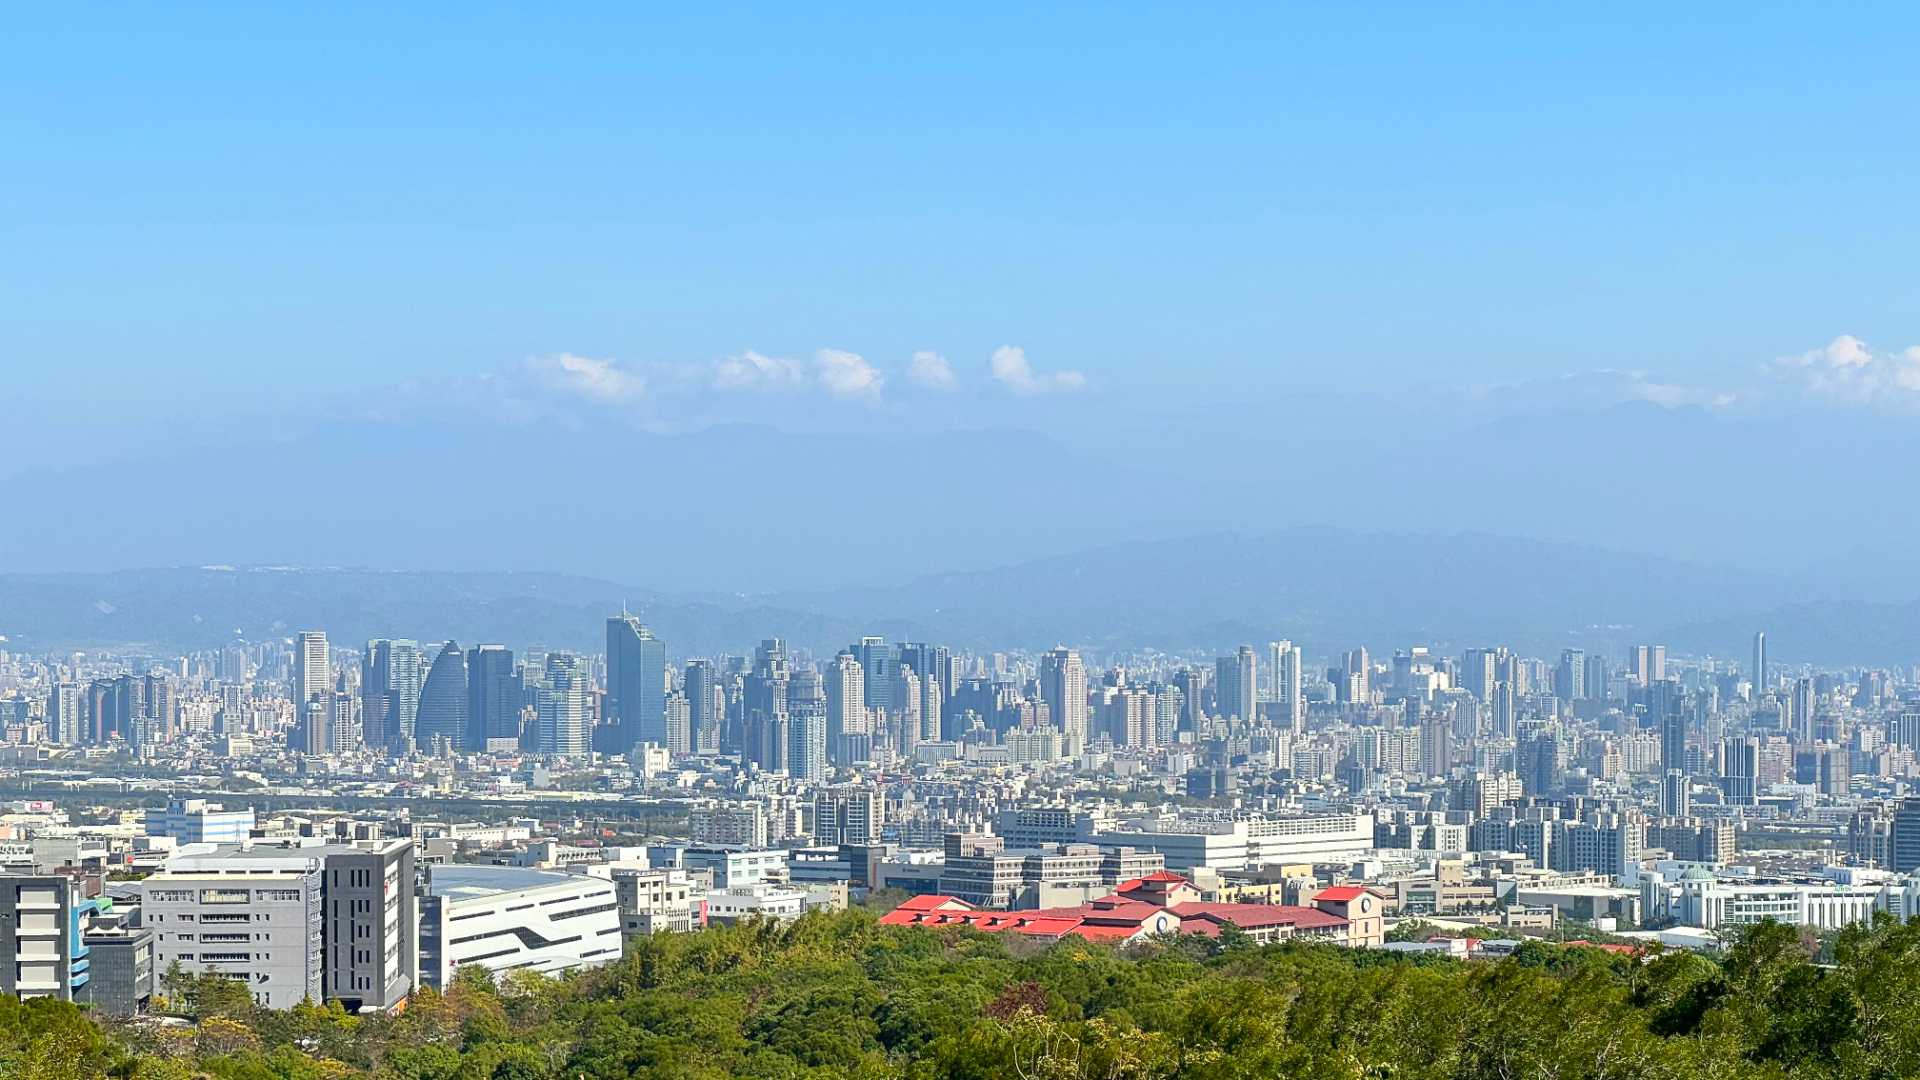 A wide-angle photo of the Taichung City skyline. It’s a beautiful sunny day. The skyline comprizes dozens (or hundreds) of high-rise buildings.